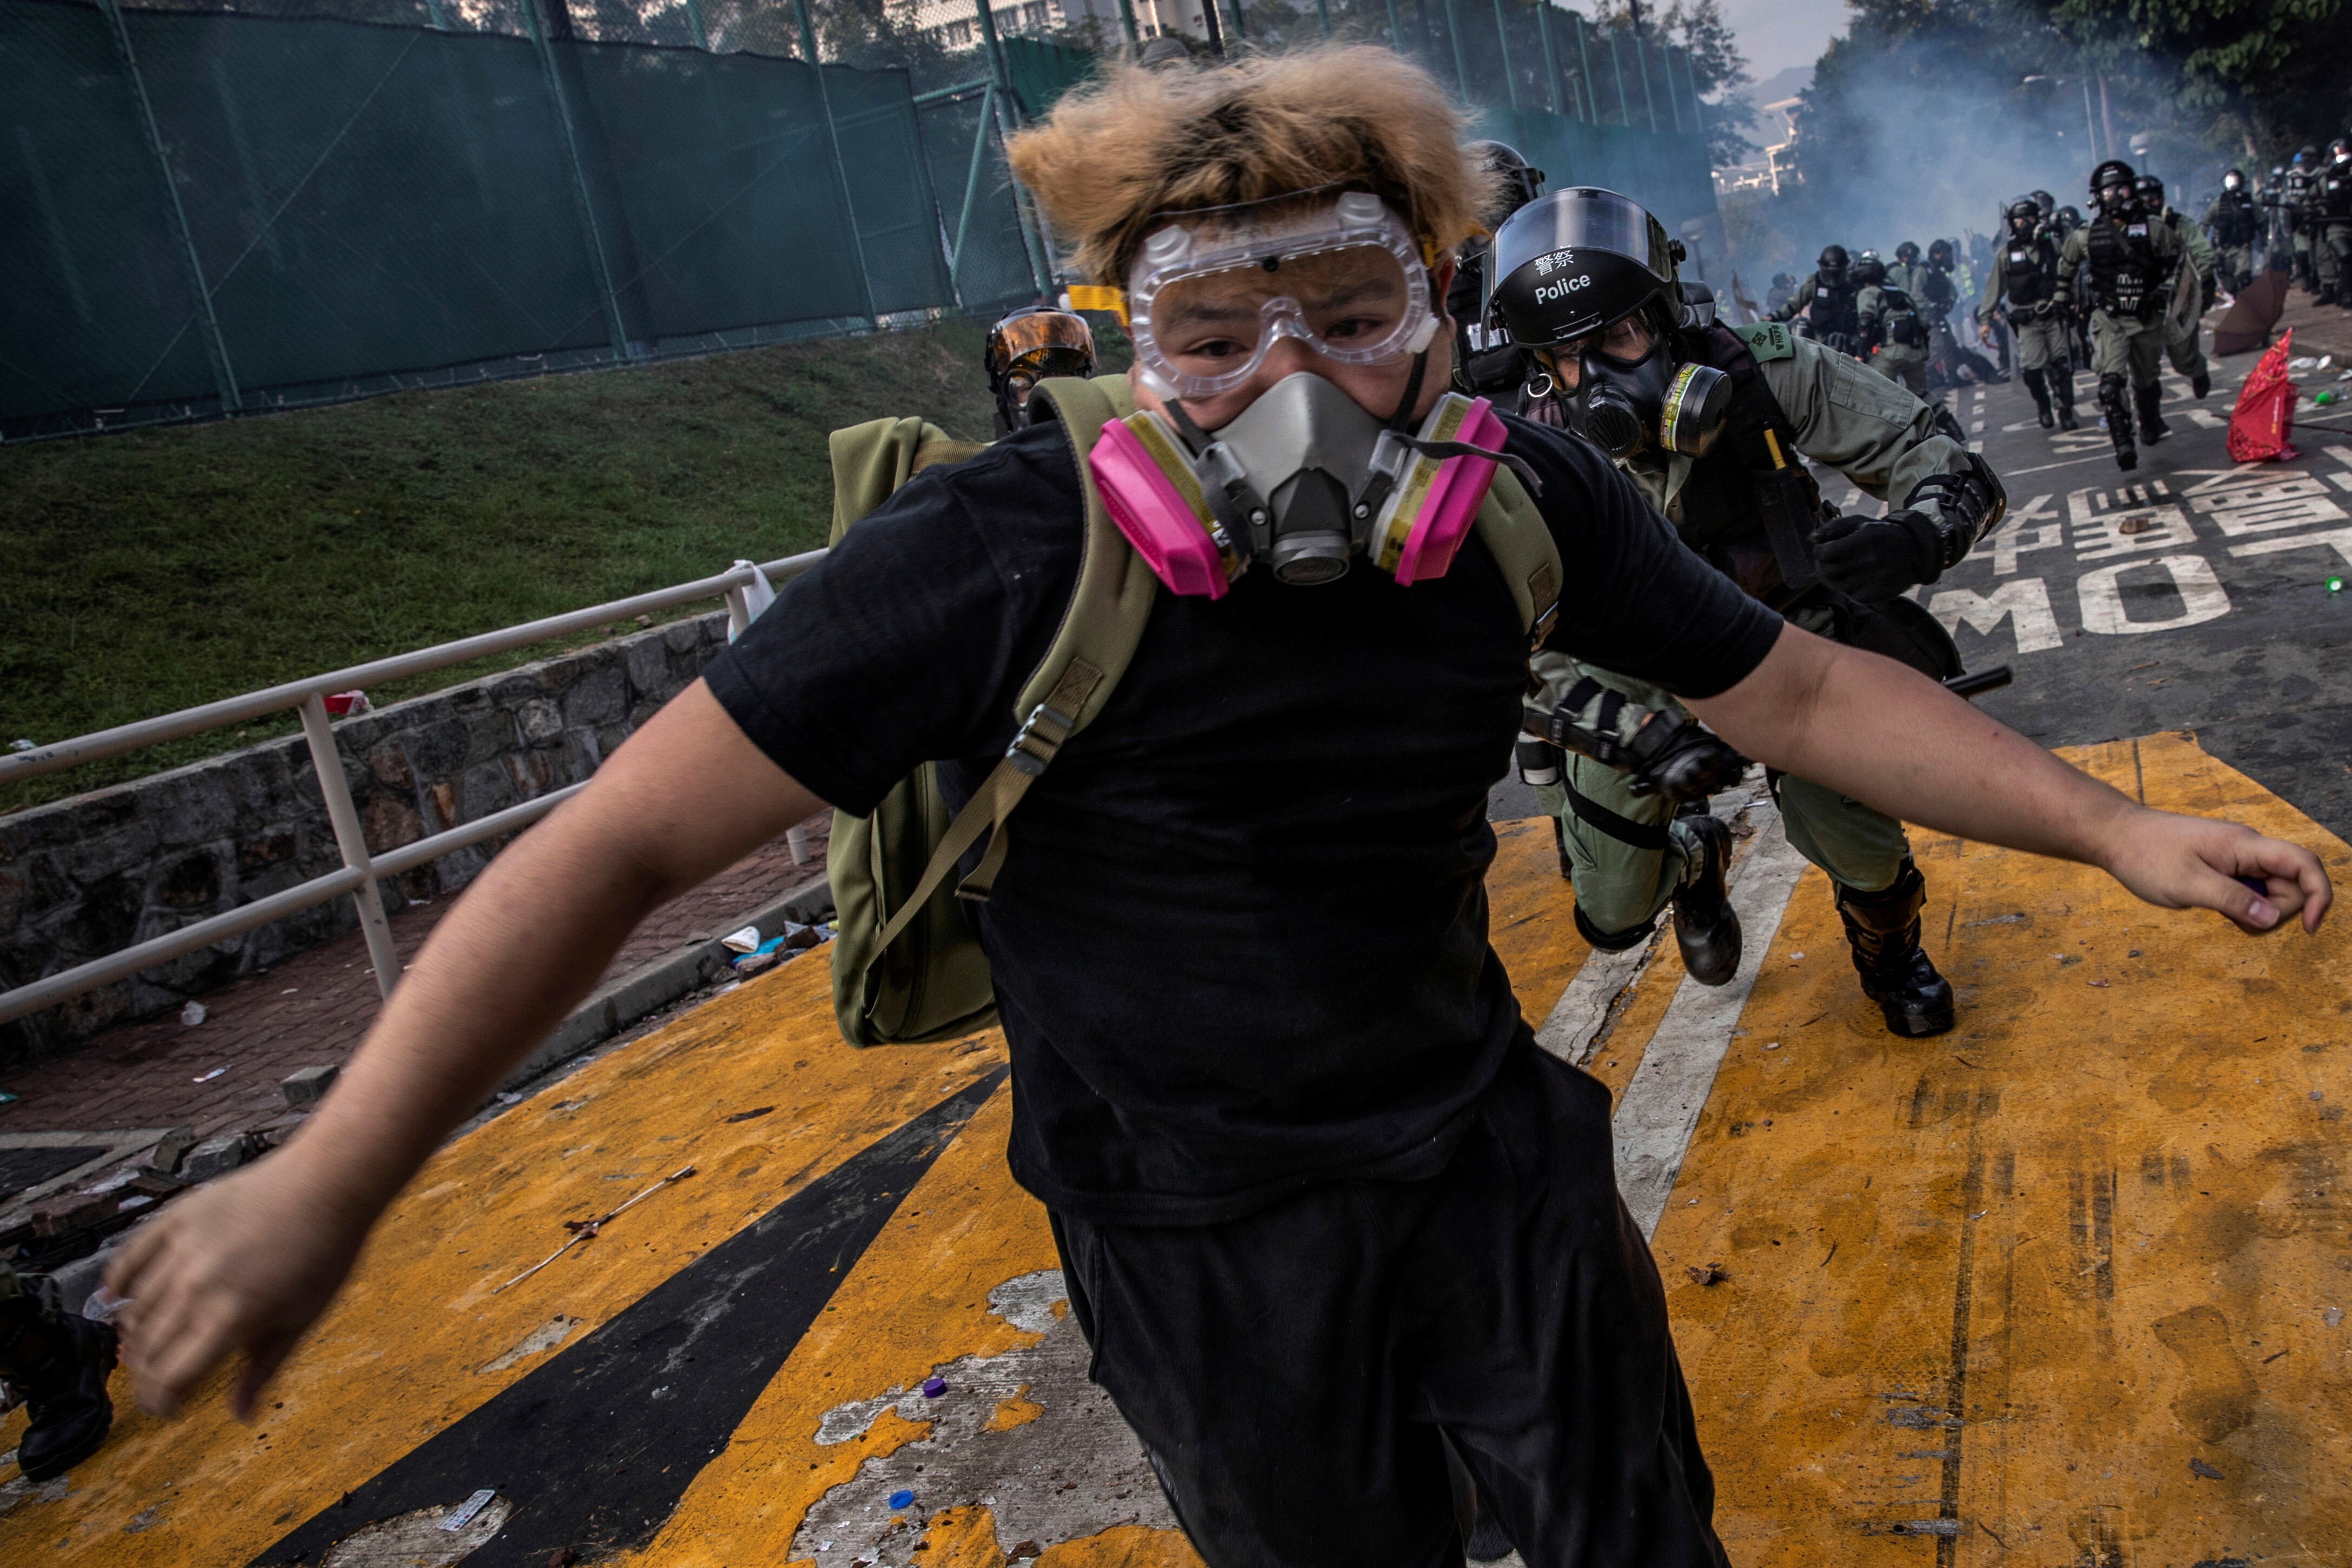 An anti-government protester is chased by riot police after skirmishes at the Chinese University of Hong Kong on November 12. Photo: Reuters